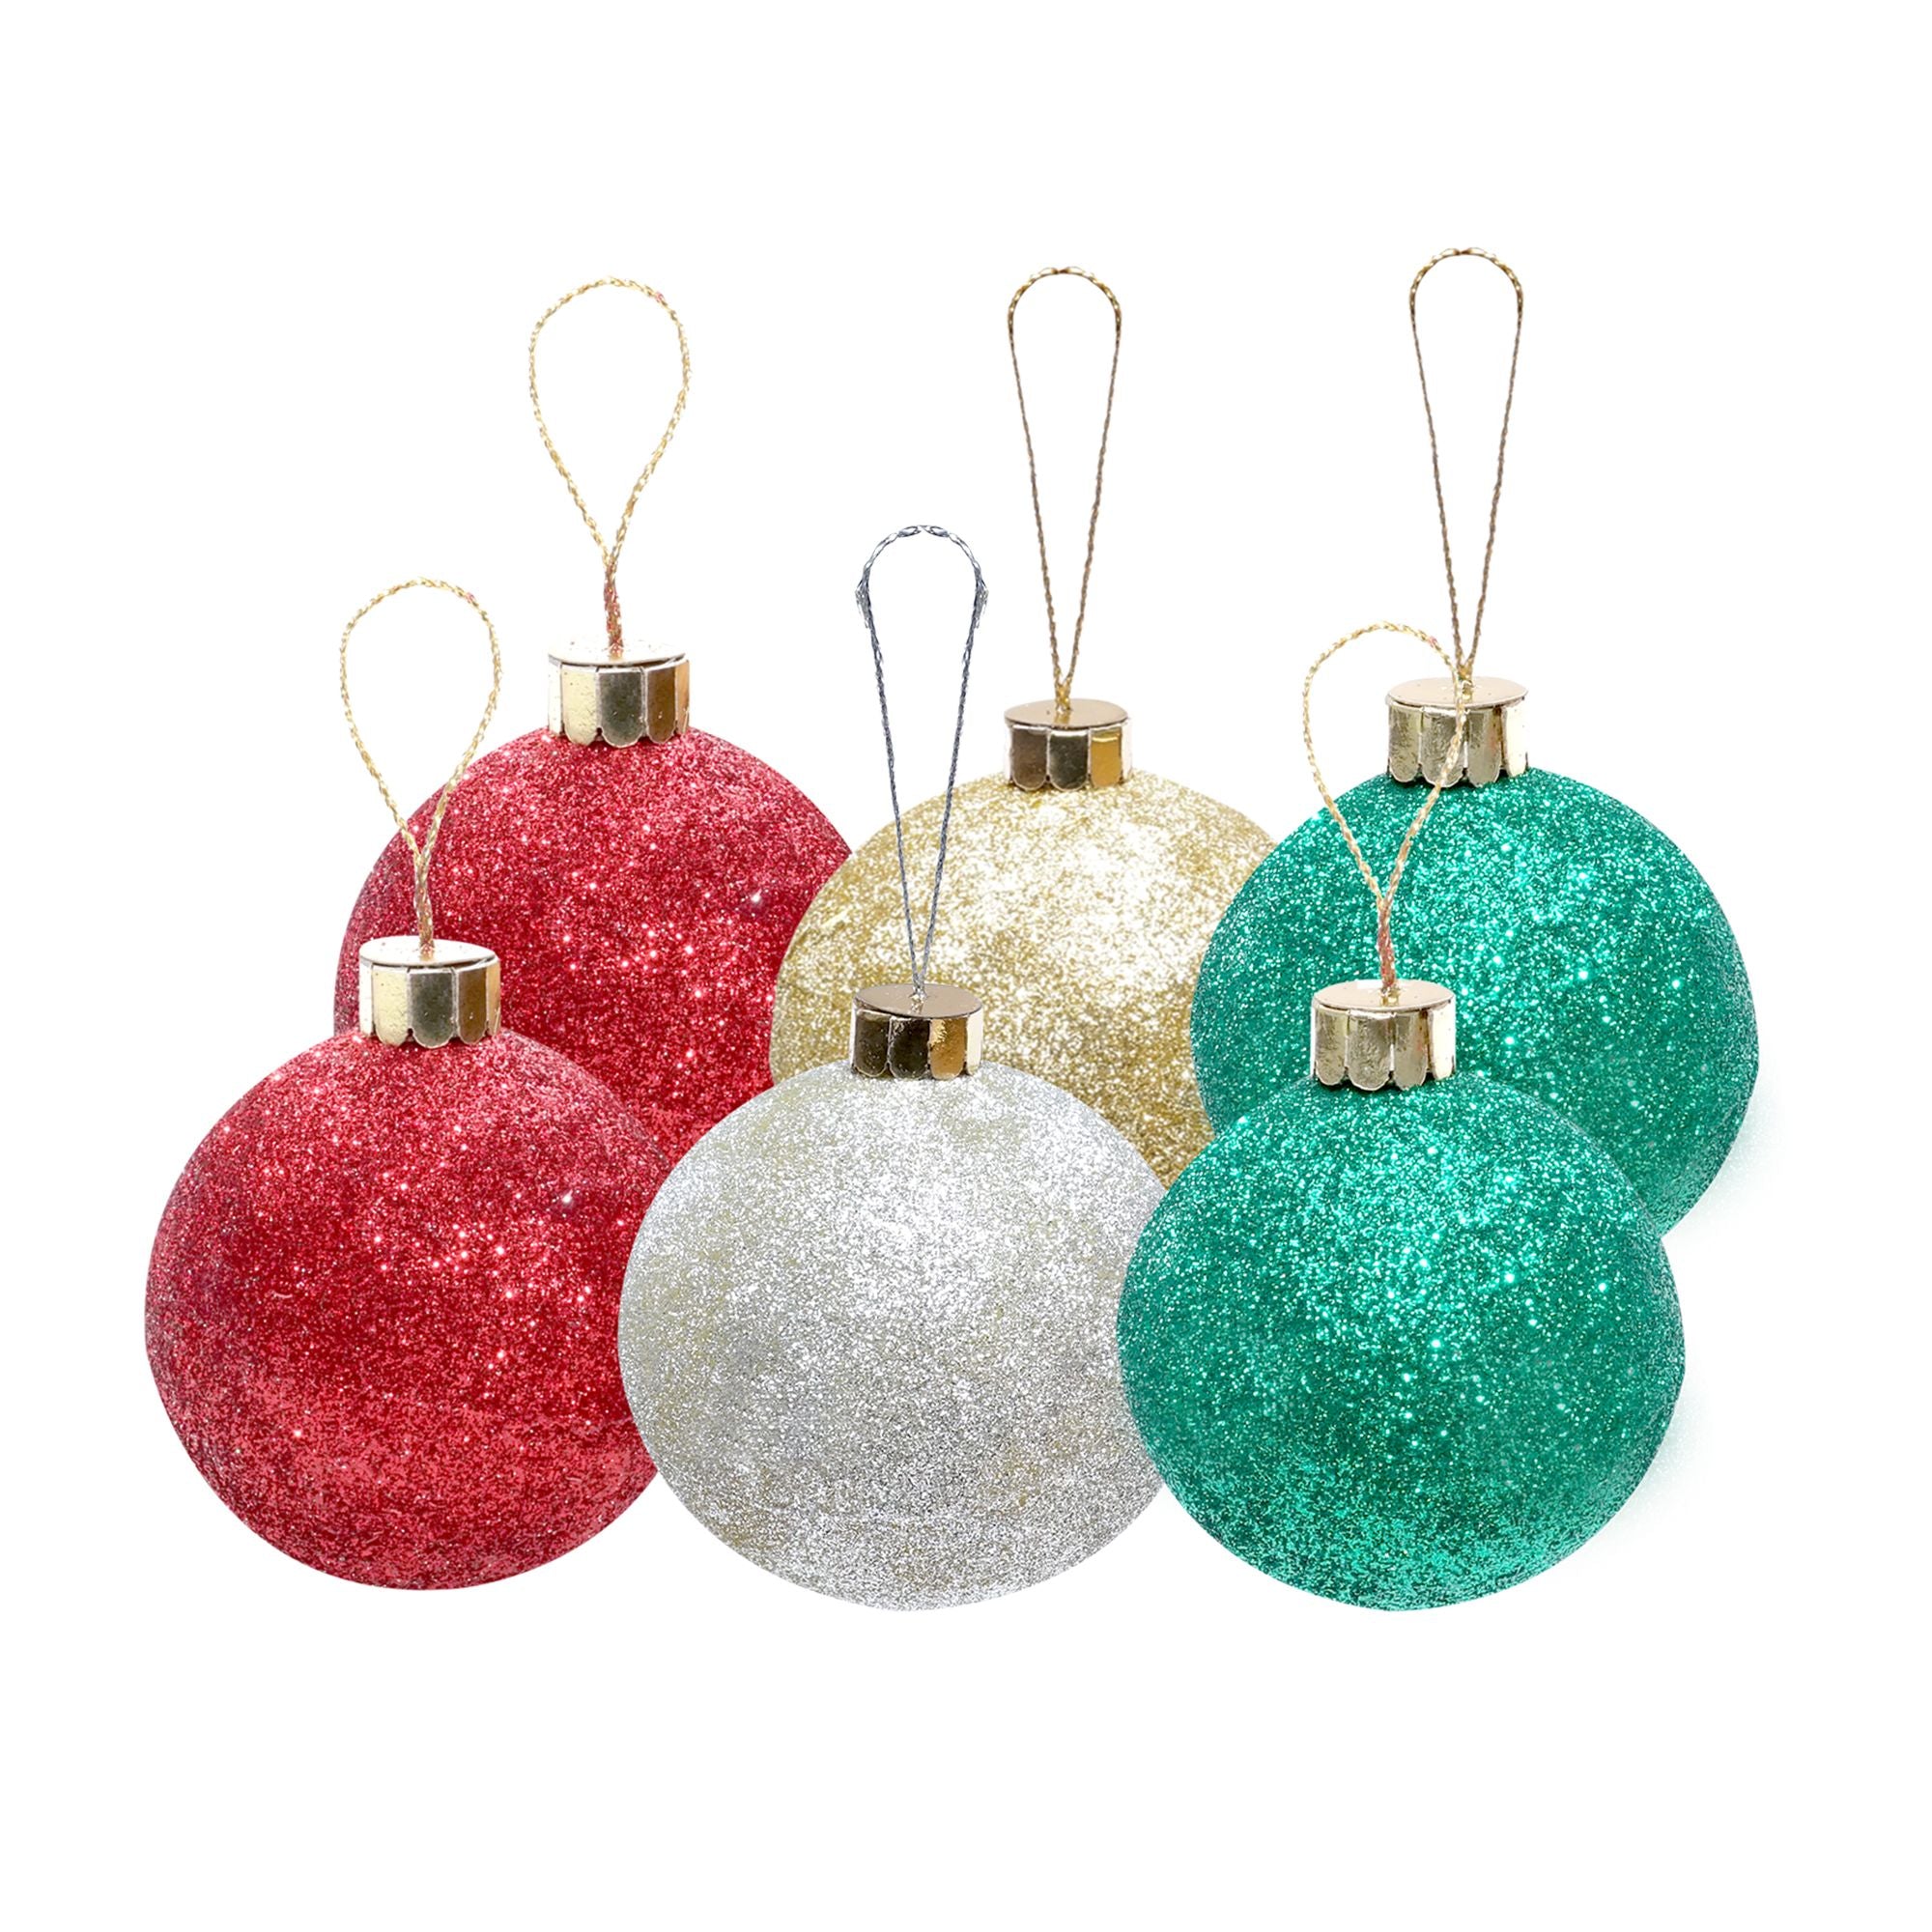 Handmade Christmas Ornaments - Glitter Baubles, 60mm, Assorted Colours - Gold, Red, Green, Silver, 6pc